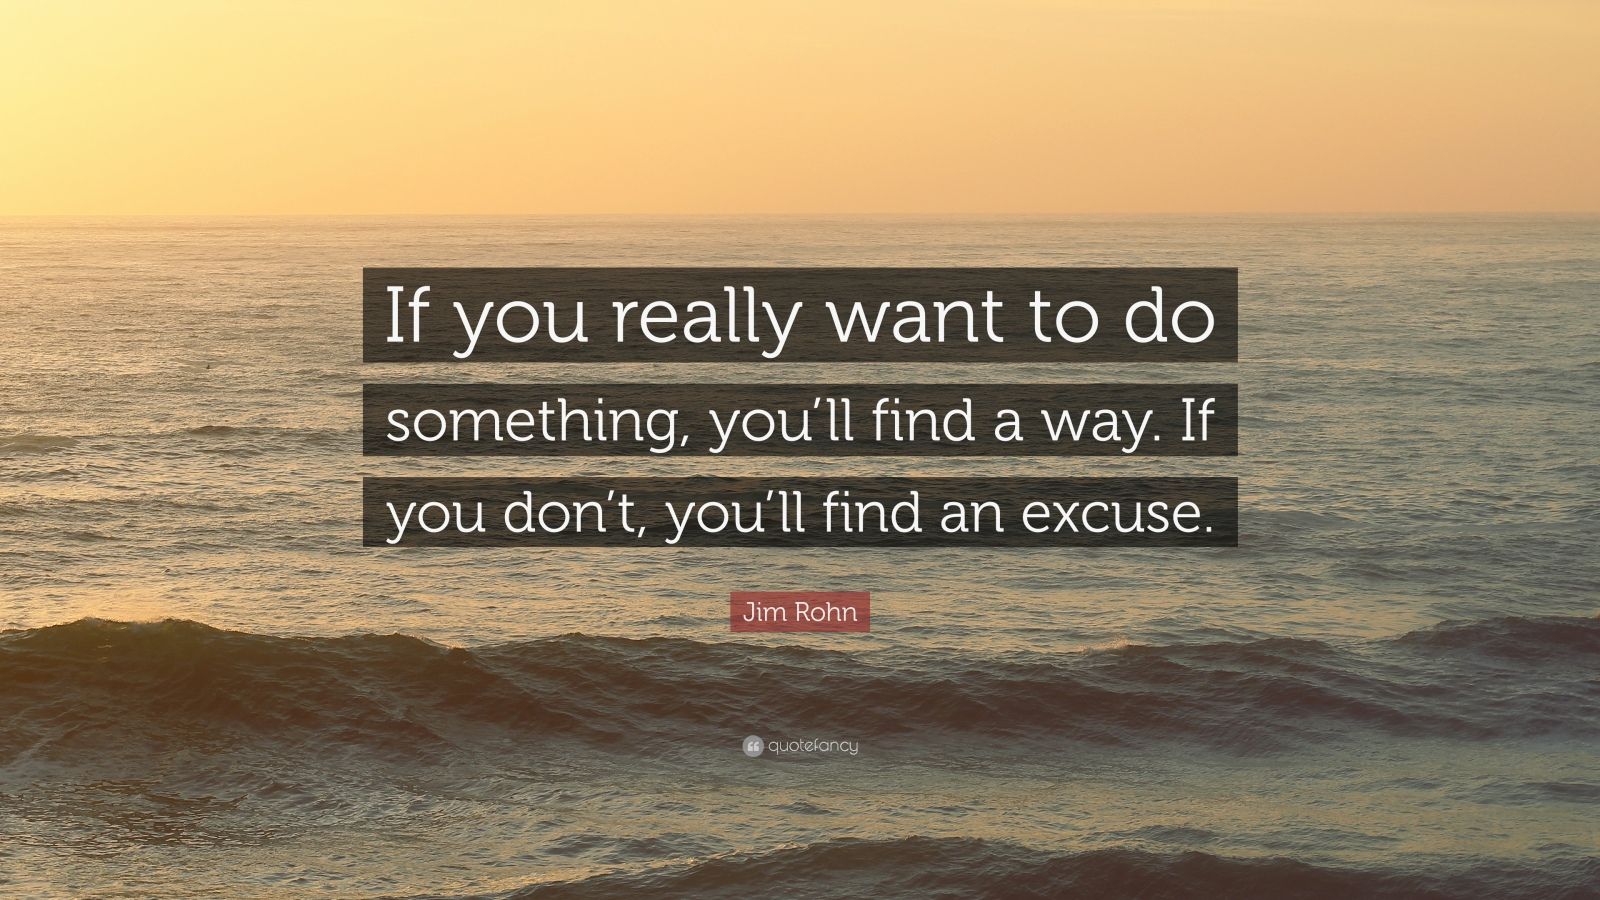 Jim Rohn Quote: “If you really want to do something, you’ll find a way ...